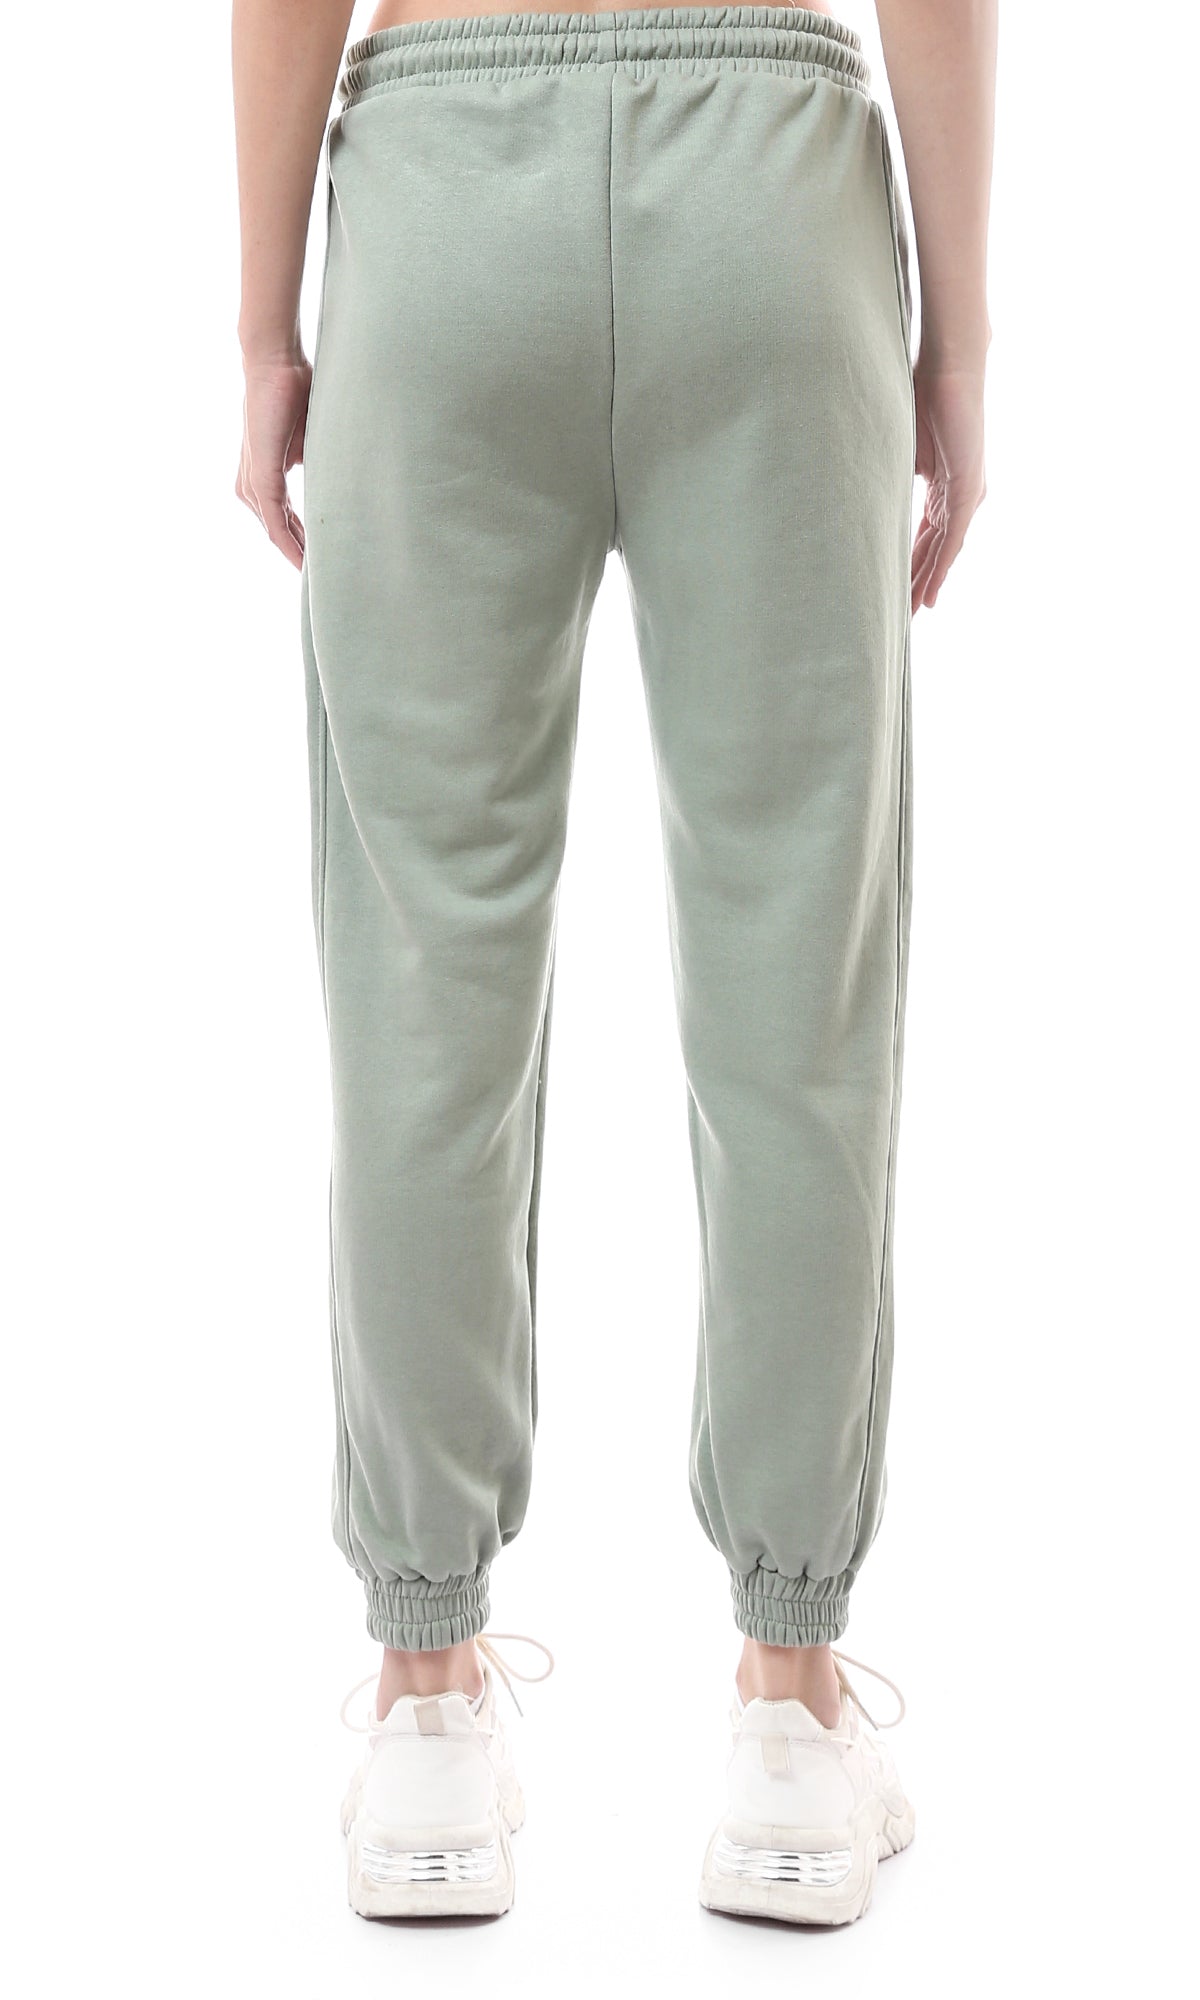 O176469 Slip On Solid Cotton Joggers Wit Side Pockets - Mint